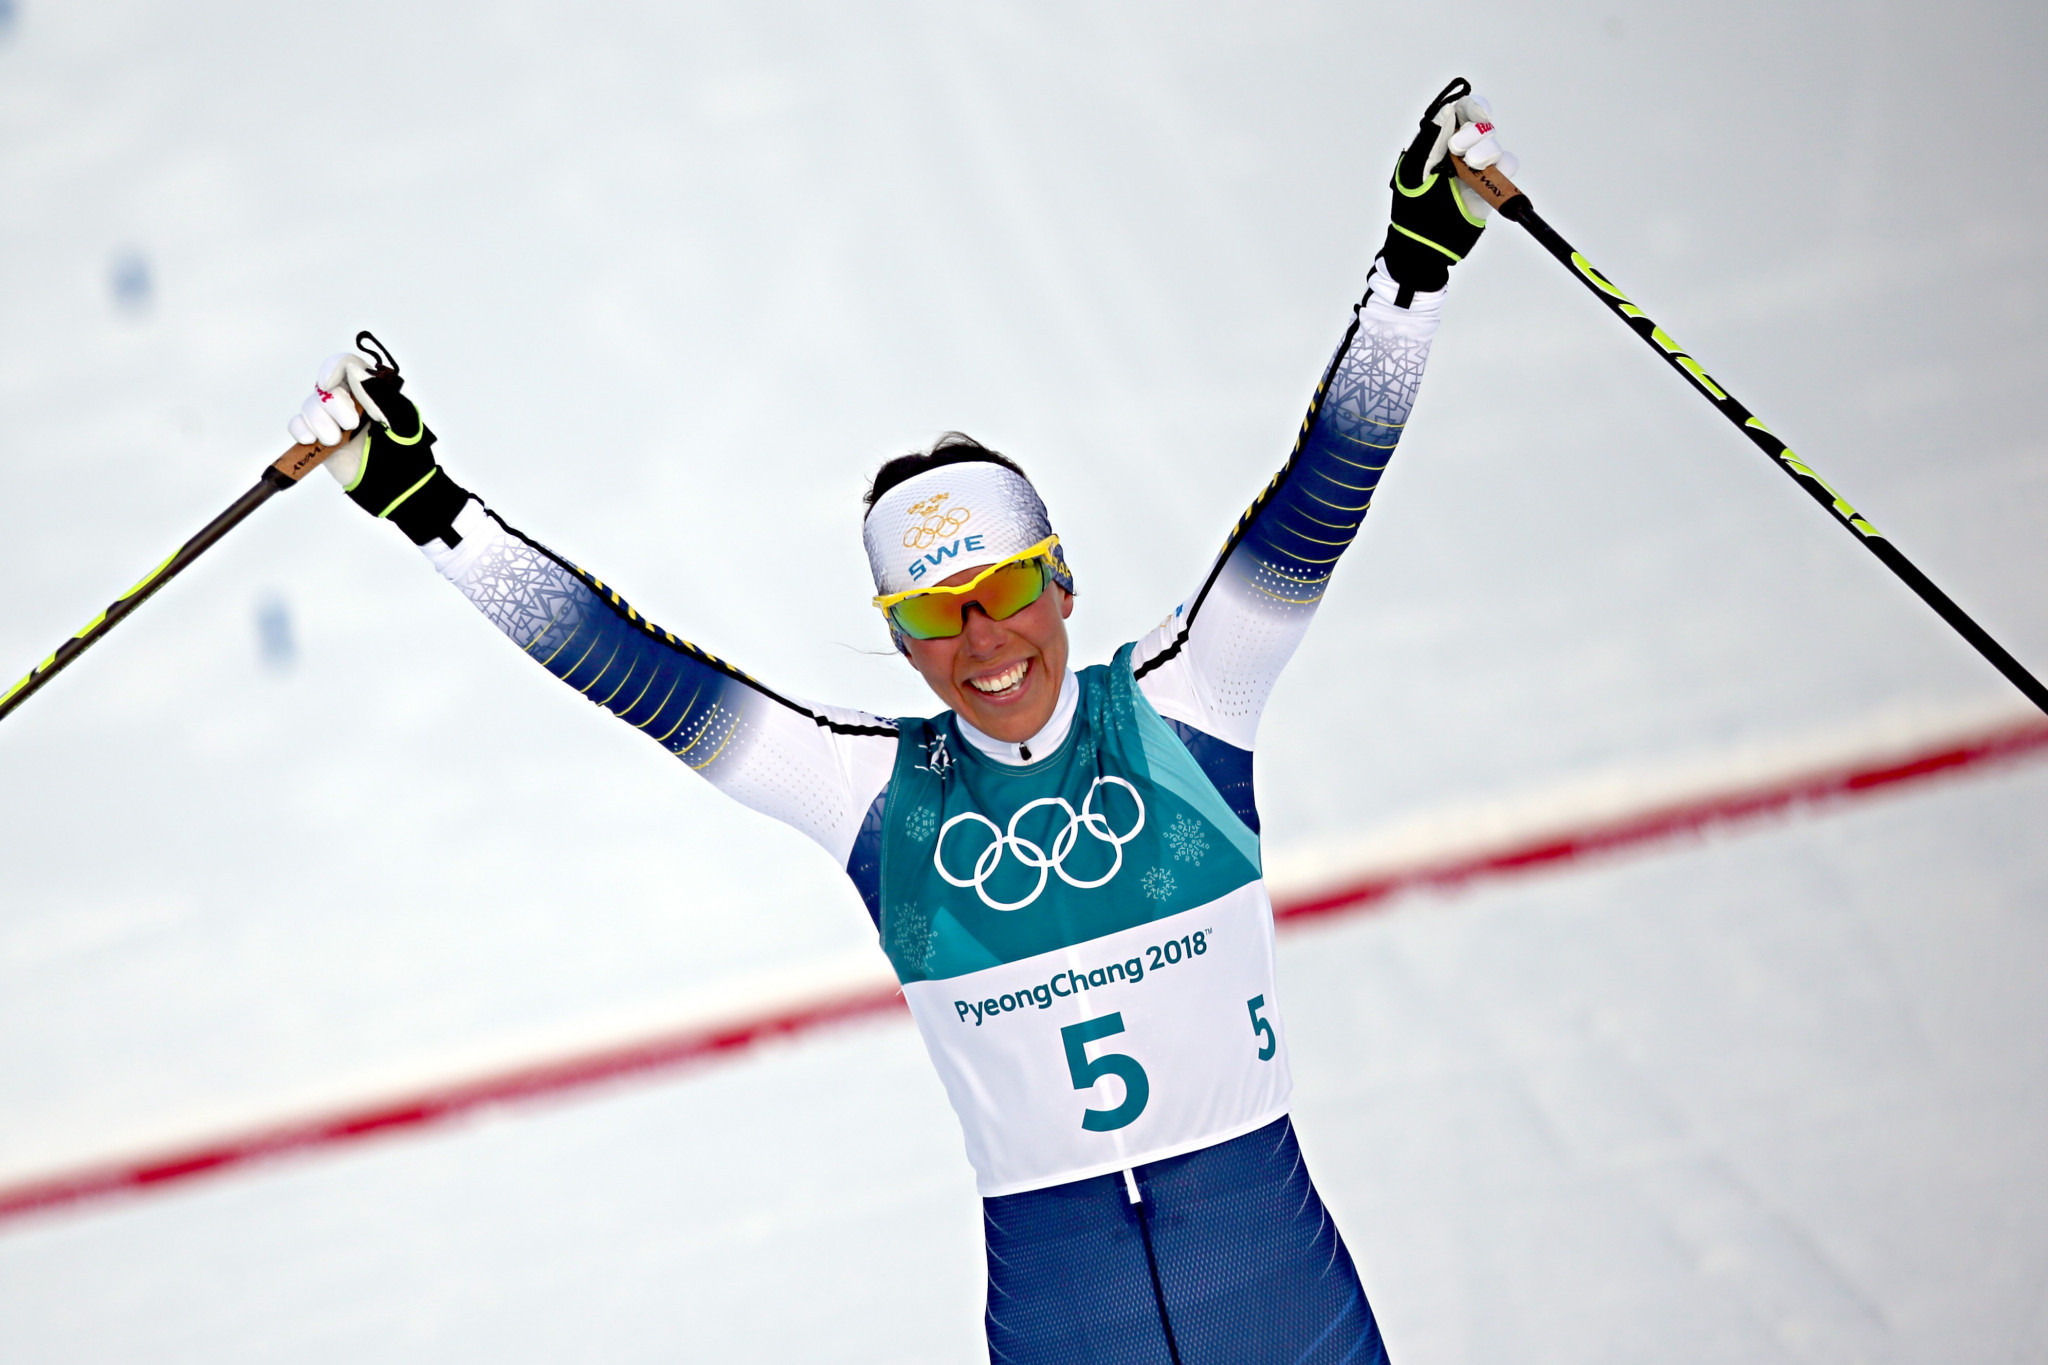 Sweden’s Charlotte Kalla claimed the first gold medal of Pyeongchang 2018 after winning the women’s 7.5 kilometres + 7.5km skiathlon event ©Getty Images